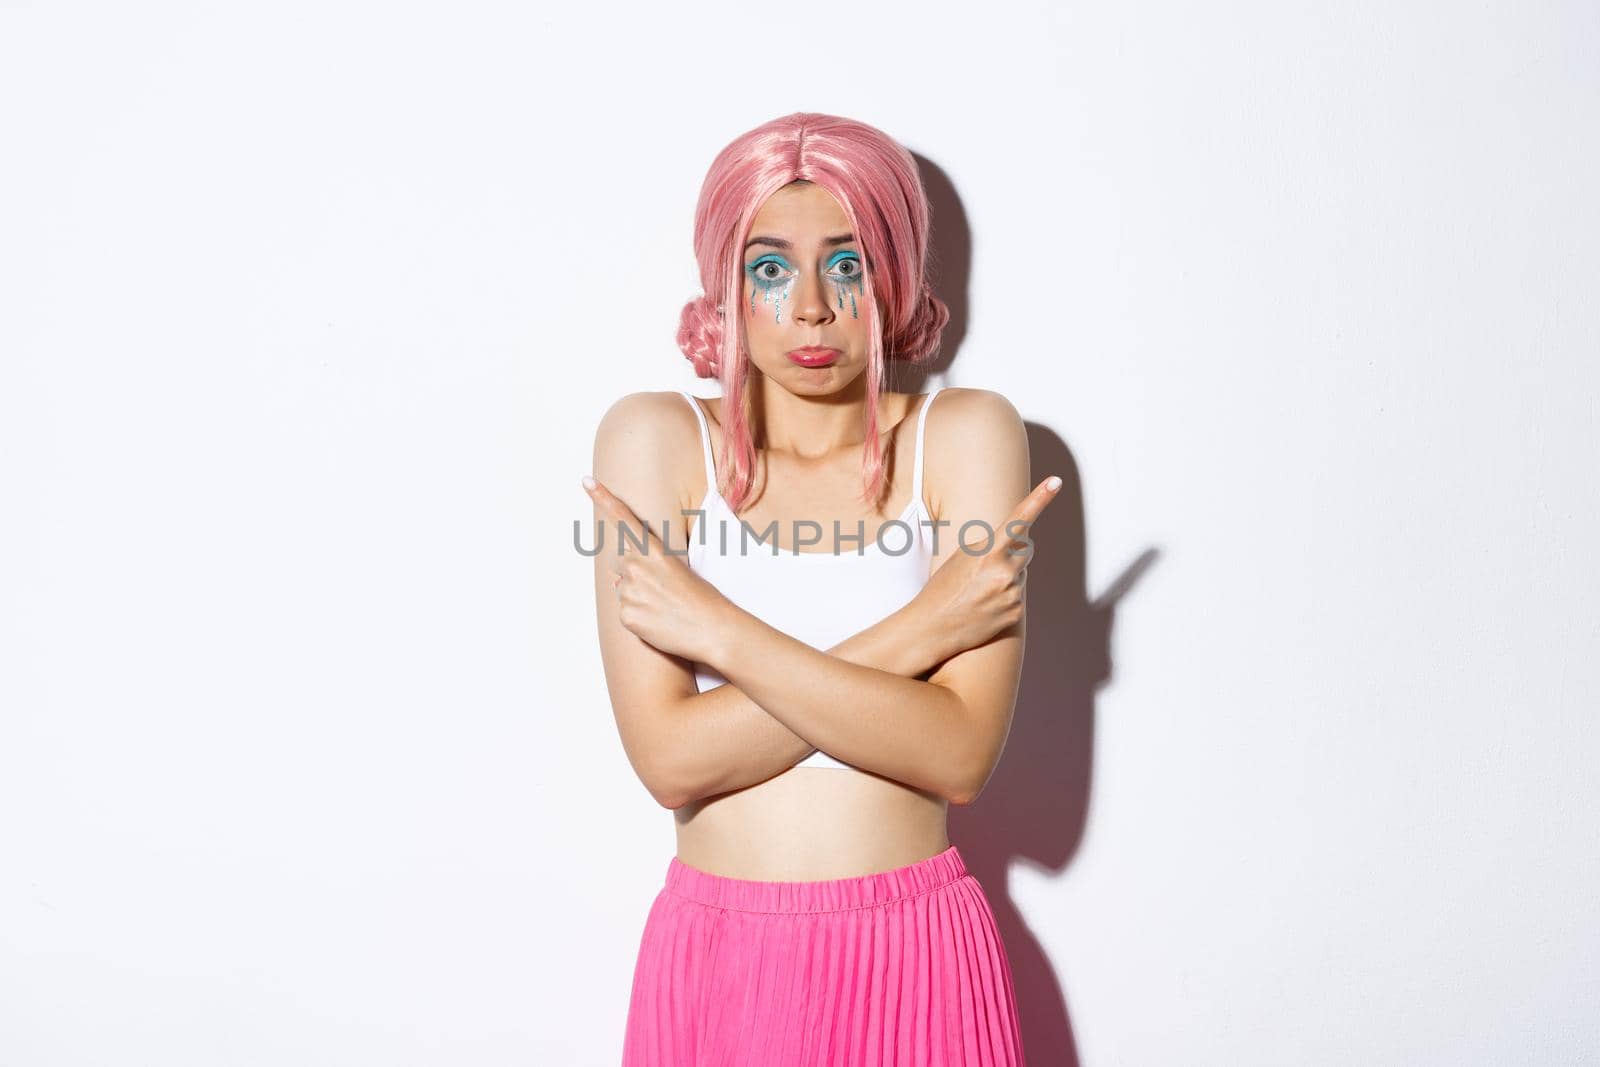 Indecisive silly female model in pink wig, with colorful makeup for halloween party, pointing sideways and shrugging, asking for help with choice, standing clueless over white background.